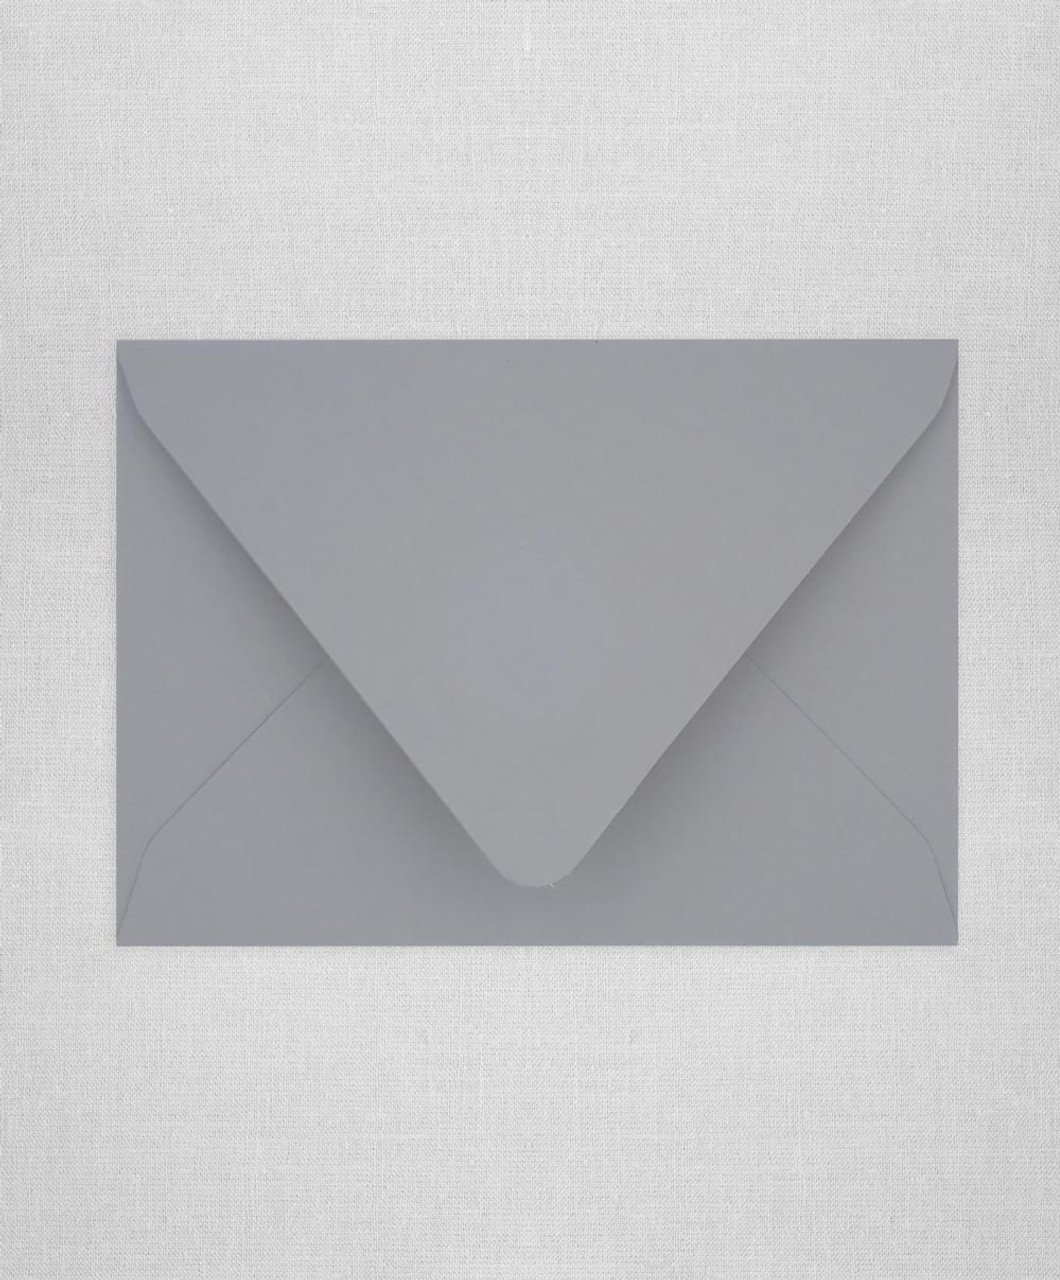 for Invitation Wedding Shower Photo A1A2A6A7 Grey Details about   25 Gray Pastel Envelopes